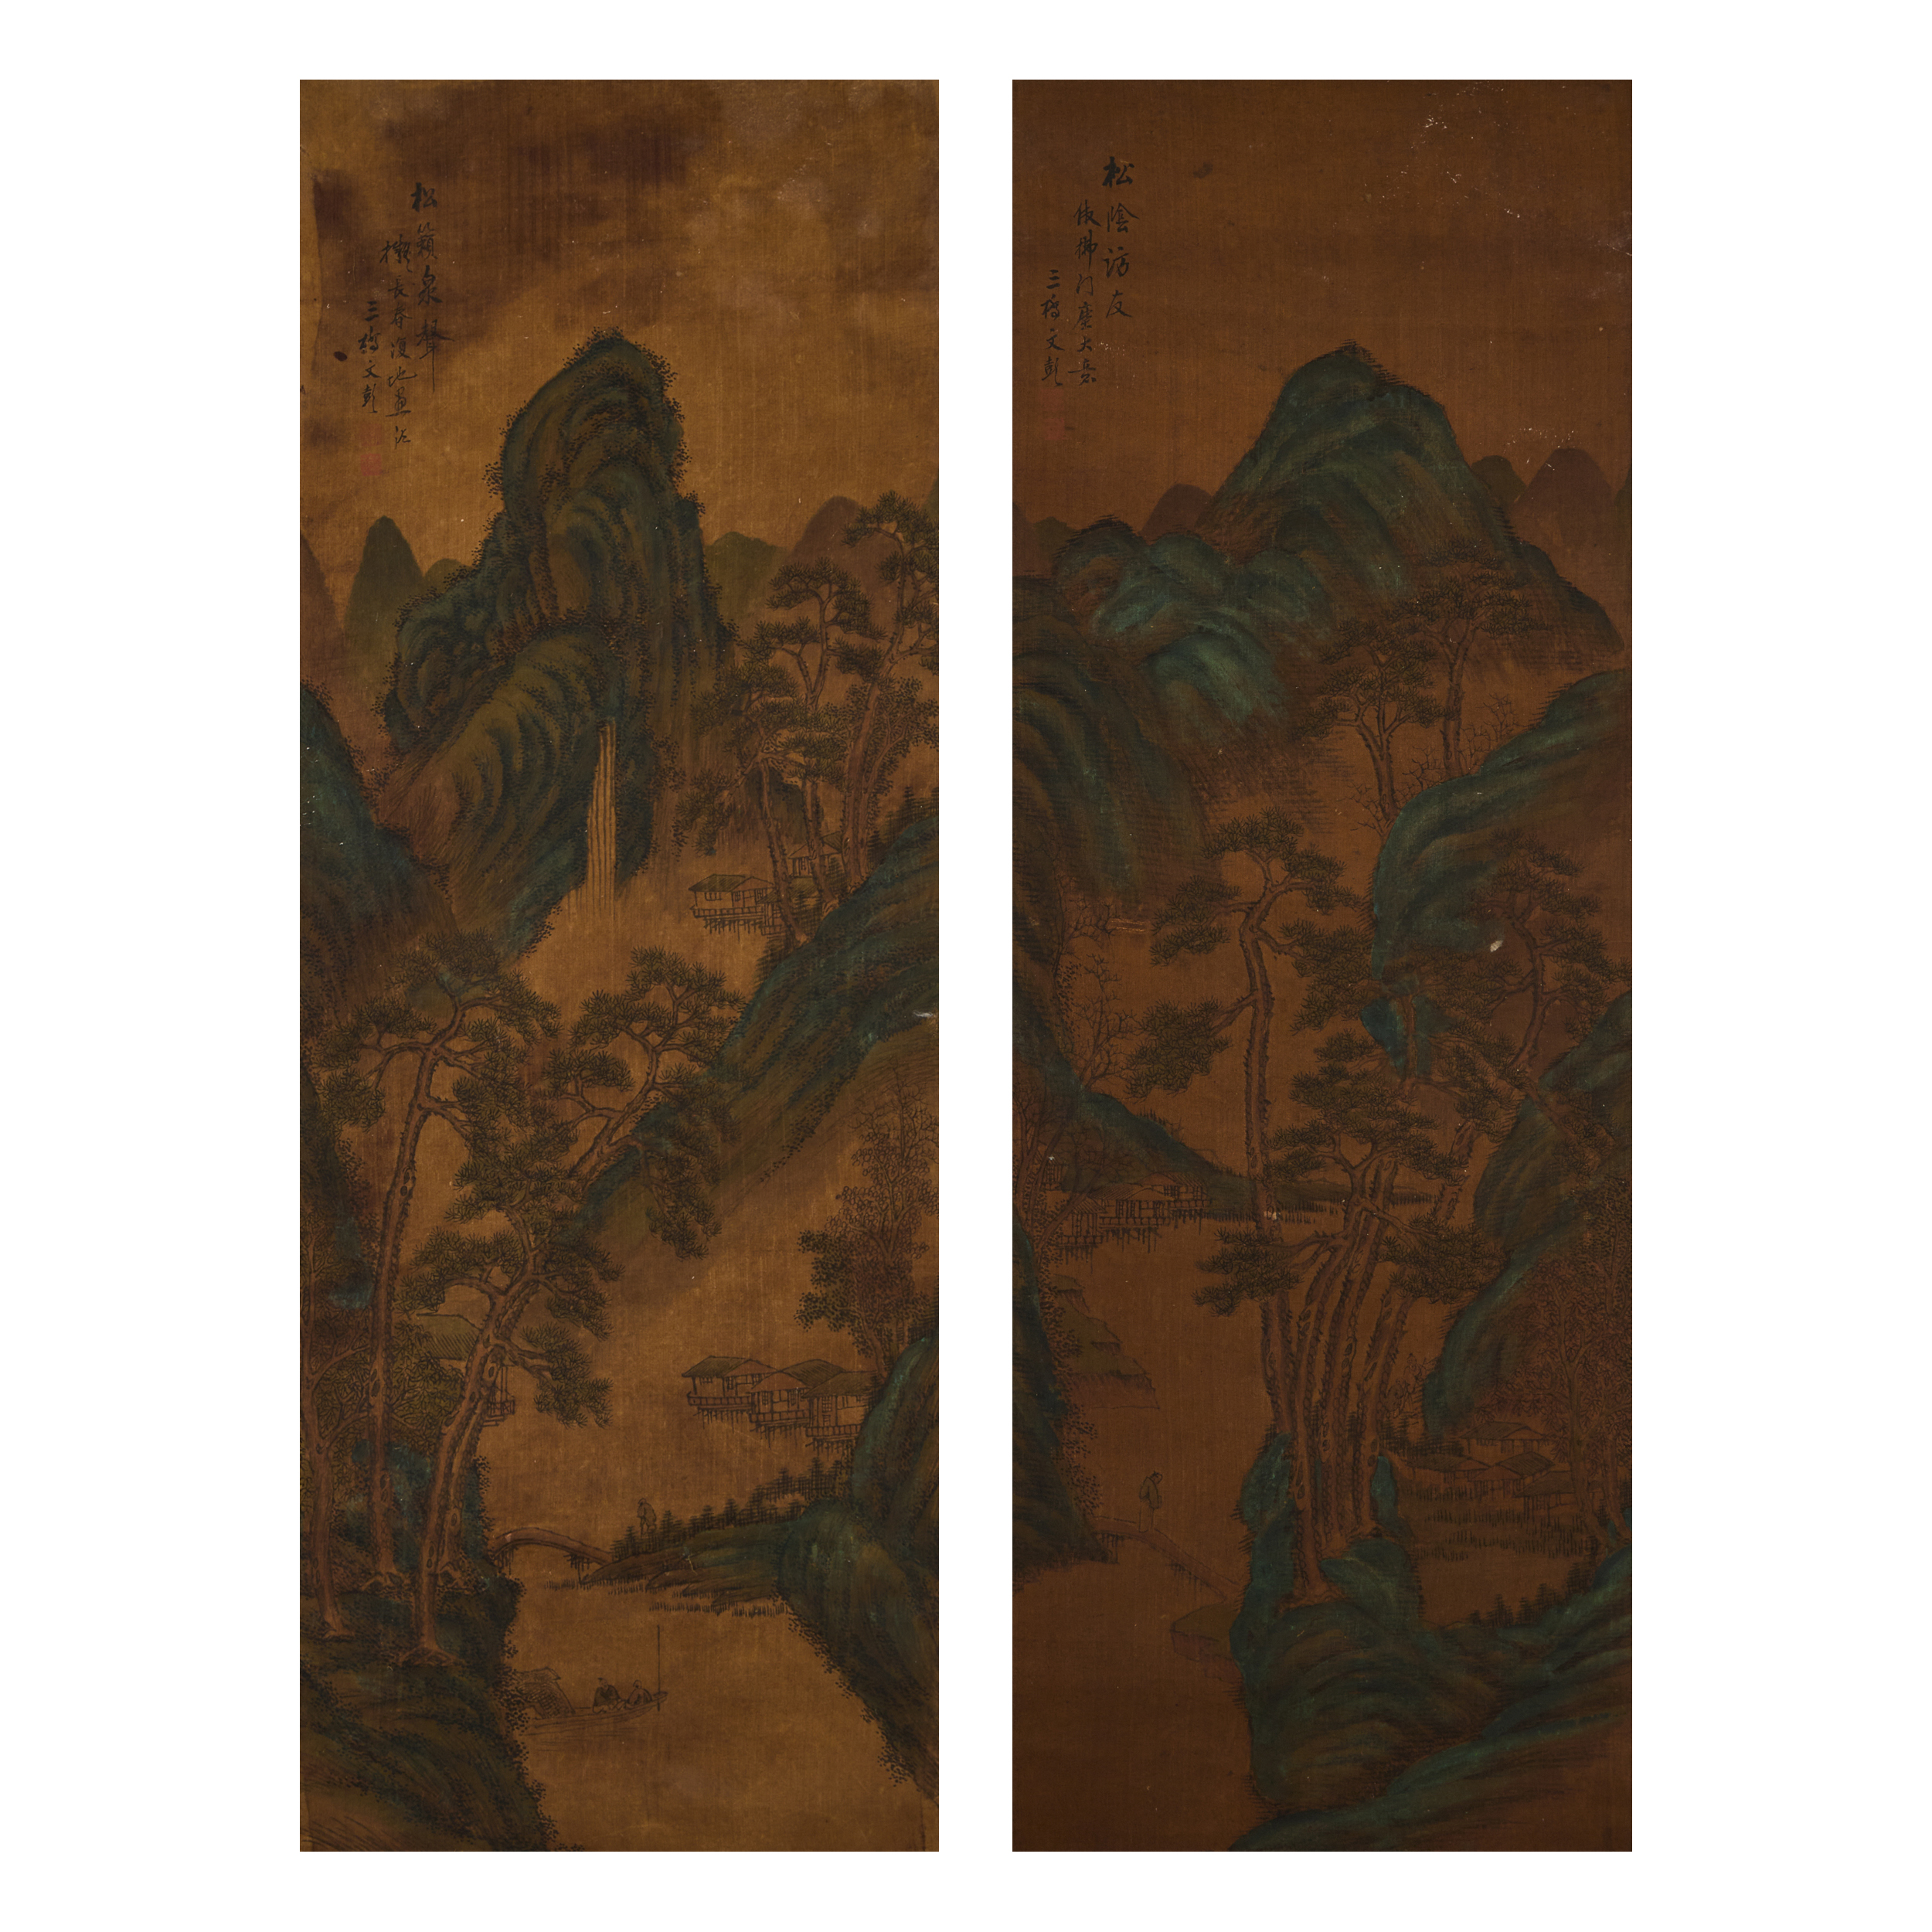 After Wen Peng (1498-1573), Two